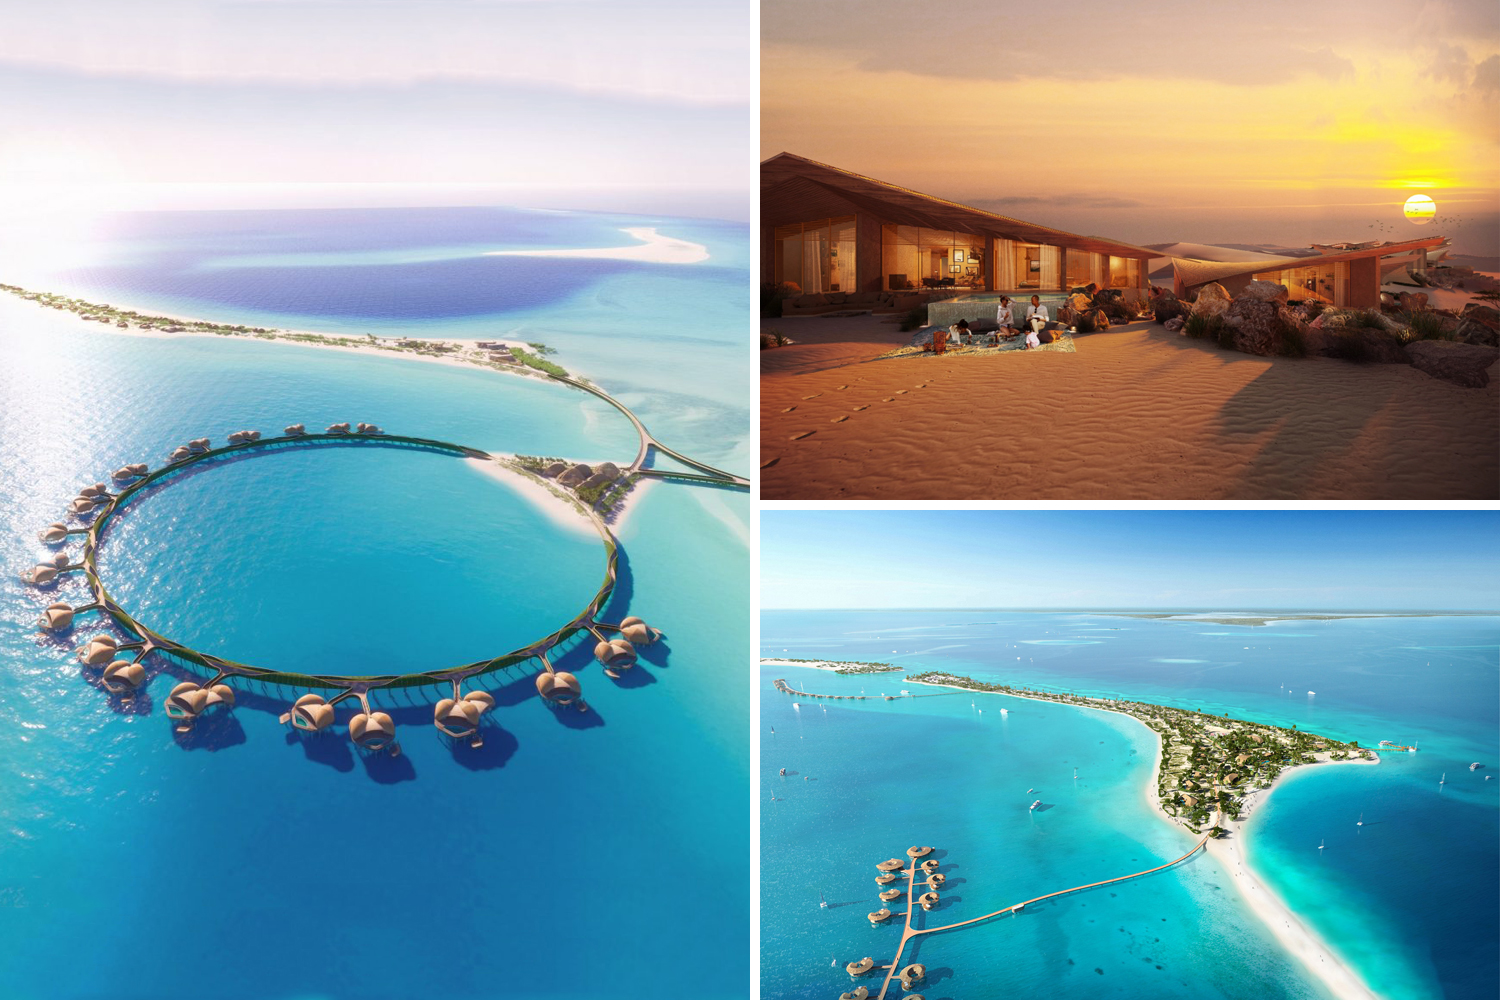 Red Sea Project which will open first at the Saudi Arabia gigaproject - Hotelier Middle East